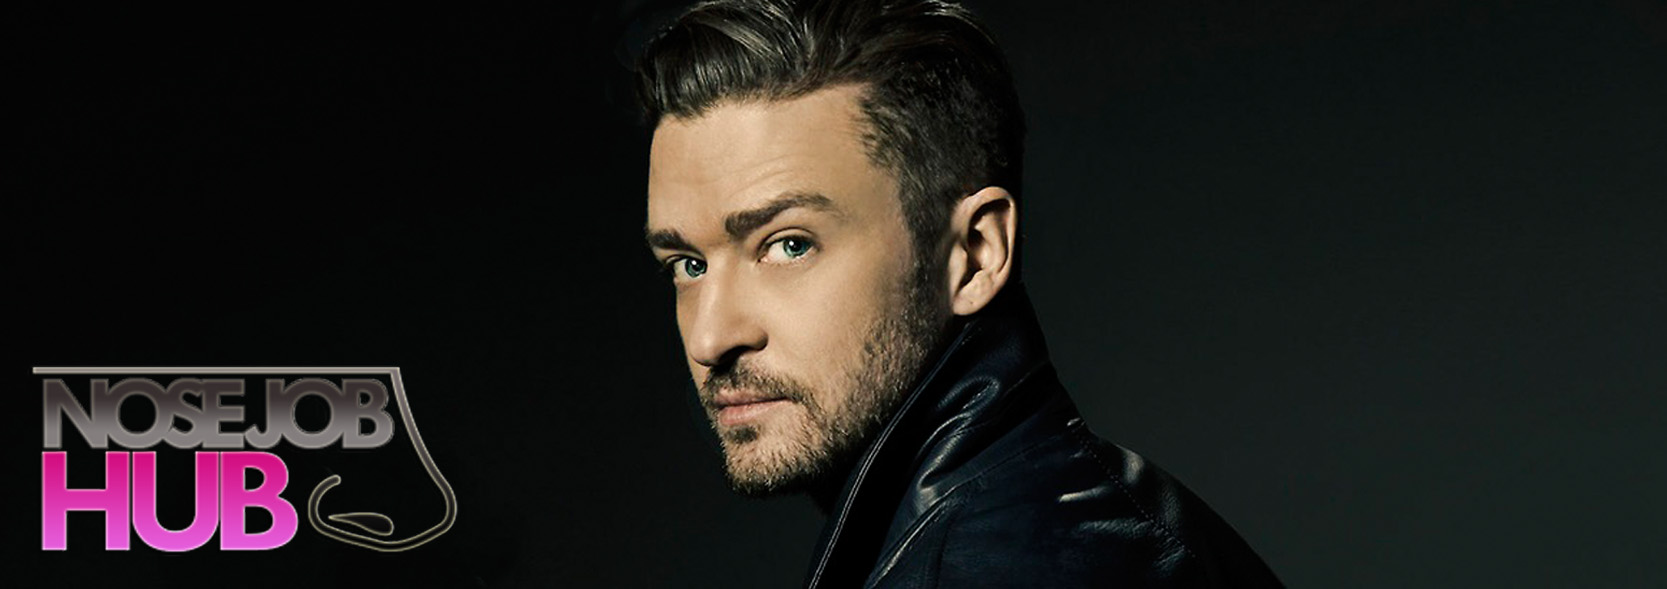 Justin Timberlake Before and After Nose Job